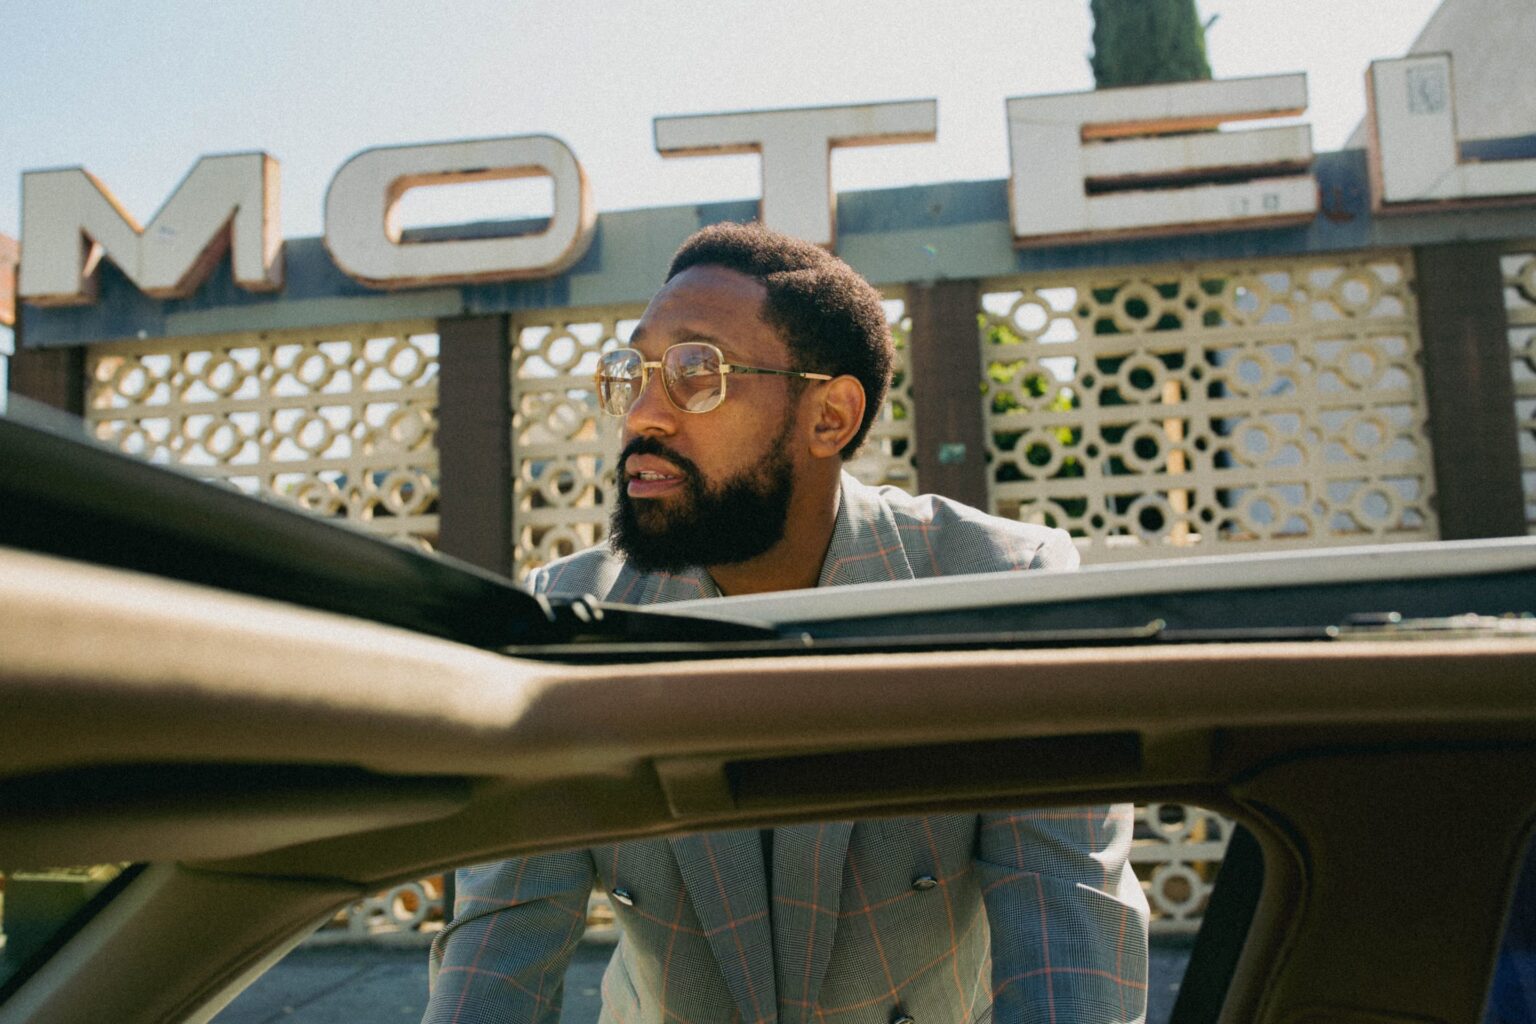 Grammy Award-winning singer and songwriter PJ Morton will be one of the musicians headlining the Northwest Tune-Up Festival taking place July 8-10 on the Bellingham Bay waterfront. During the day